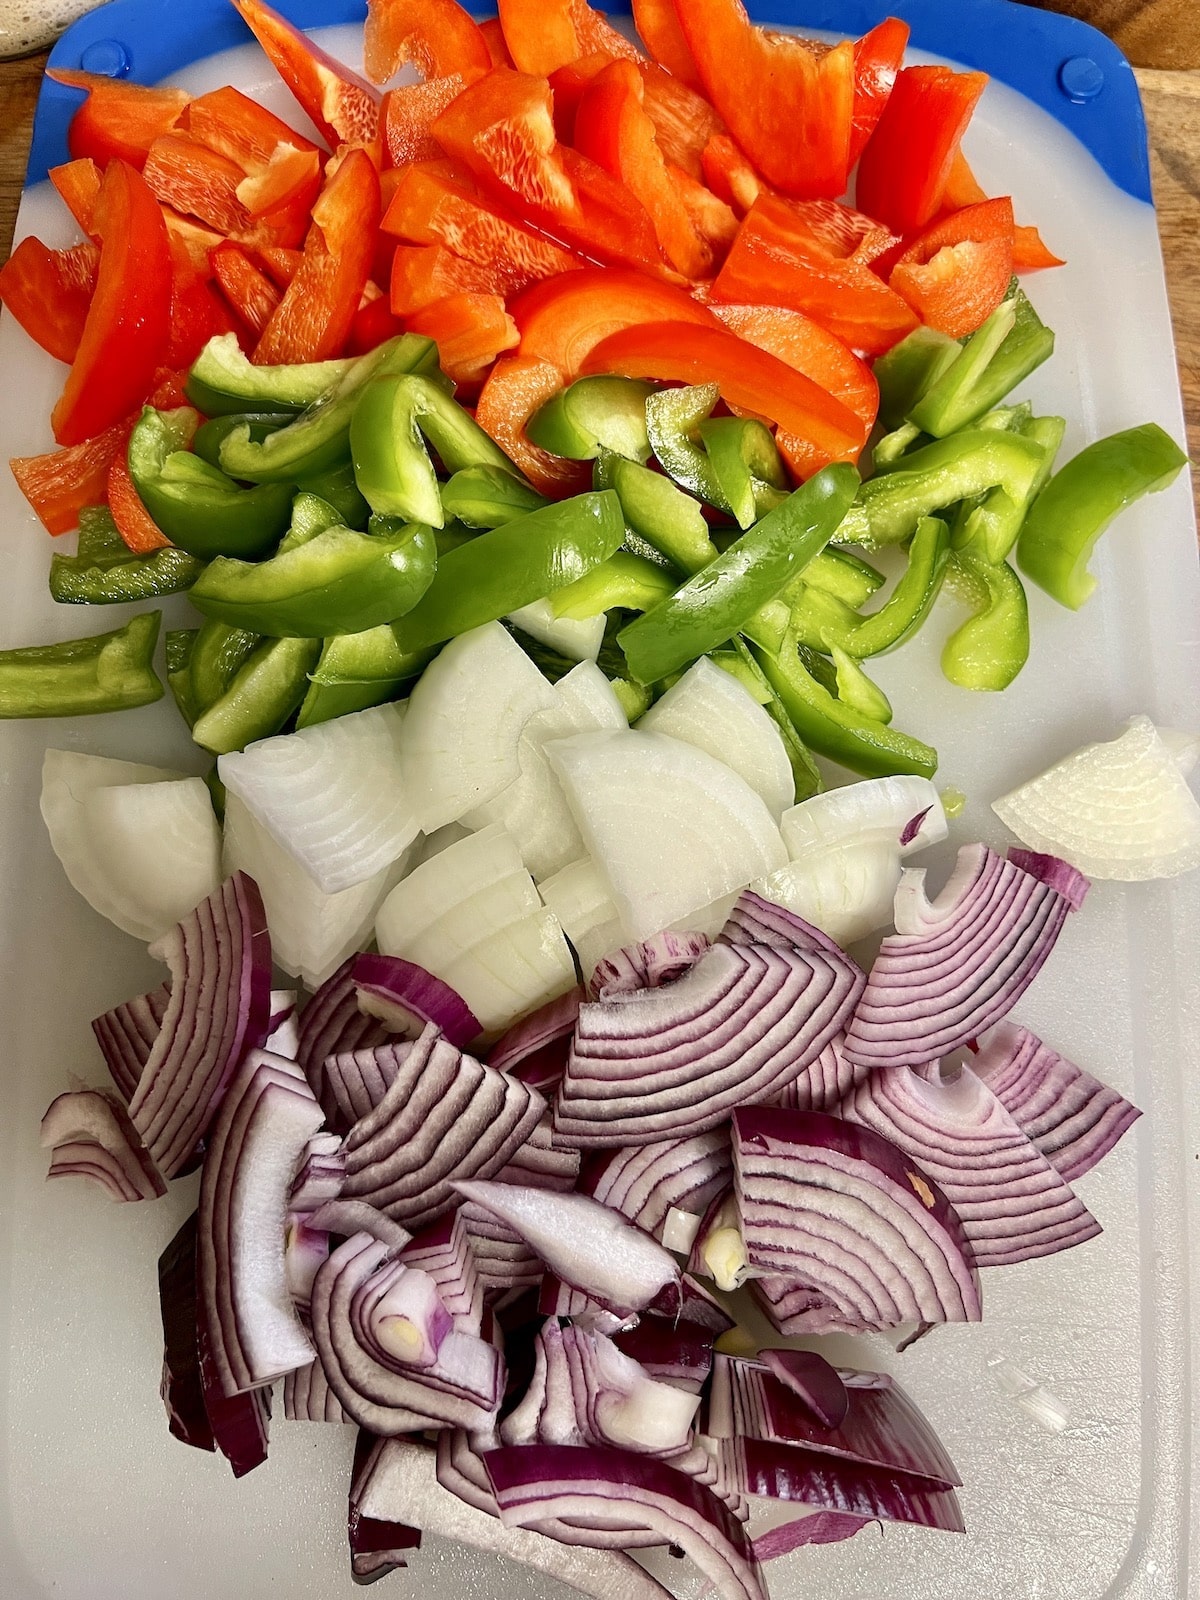 Sliced bell peppers and onions for fajitas.